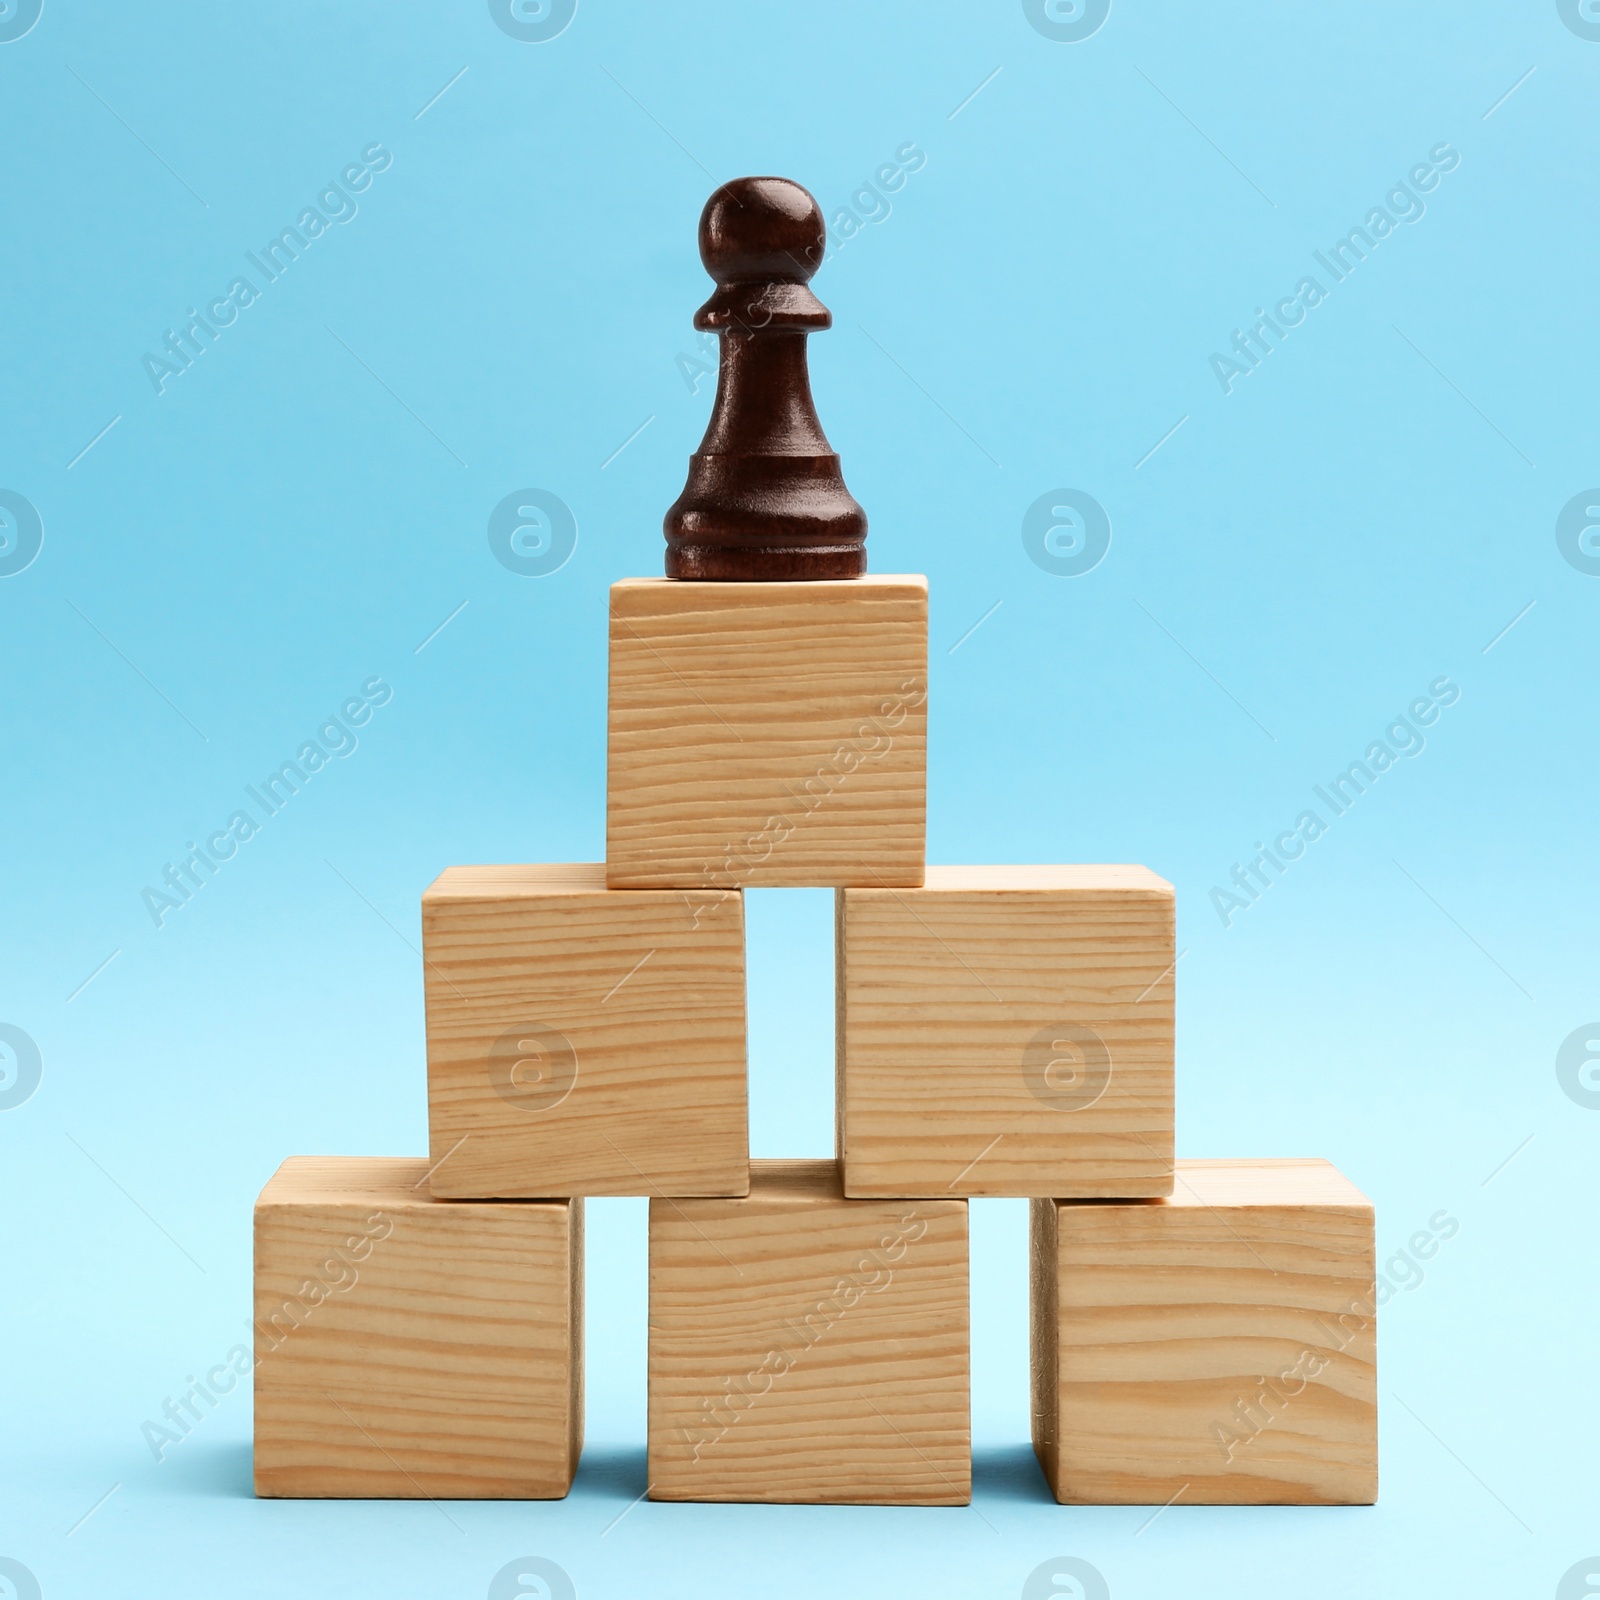 Photo of Black piece on top of wooden pyramid against light blue background. Career promotion concept